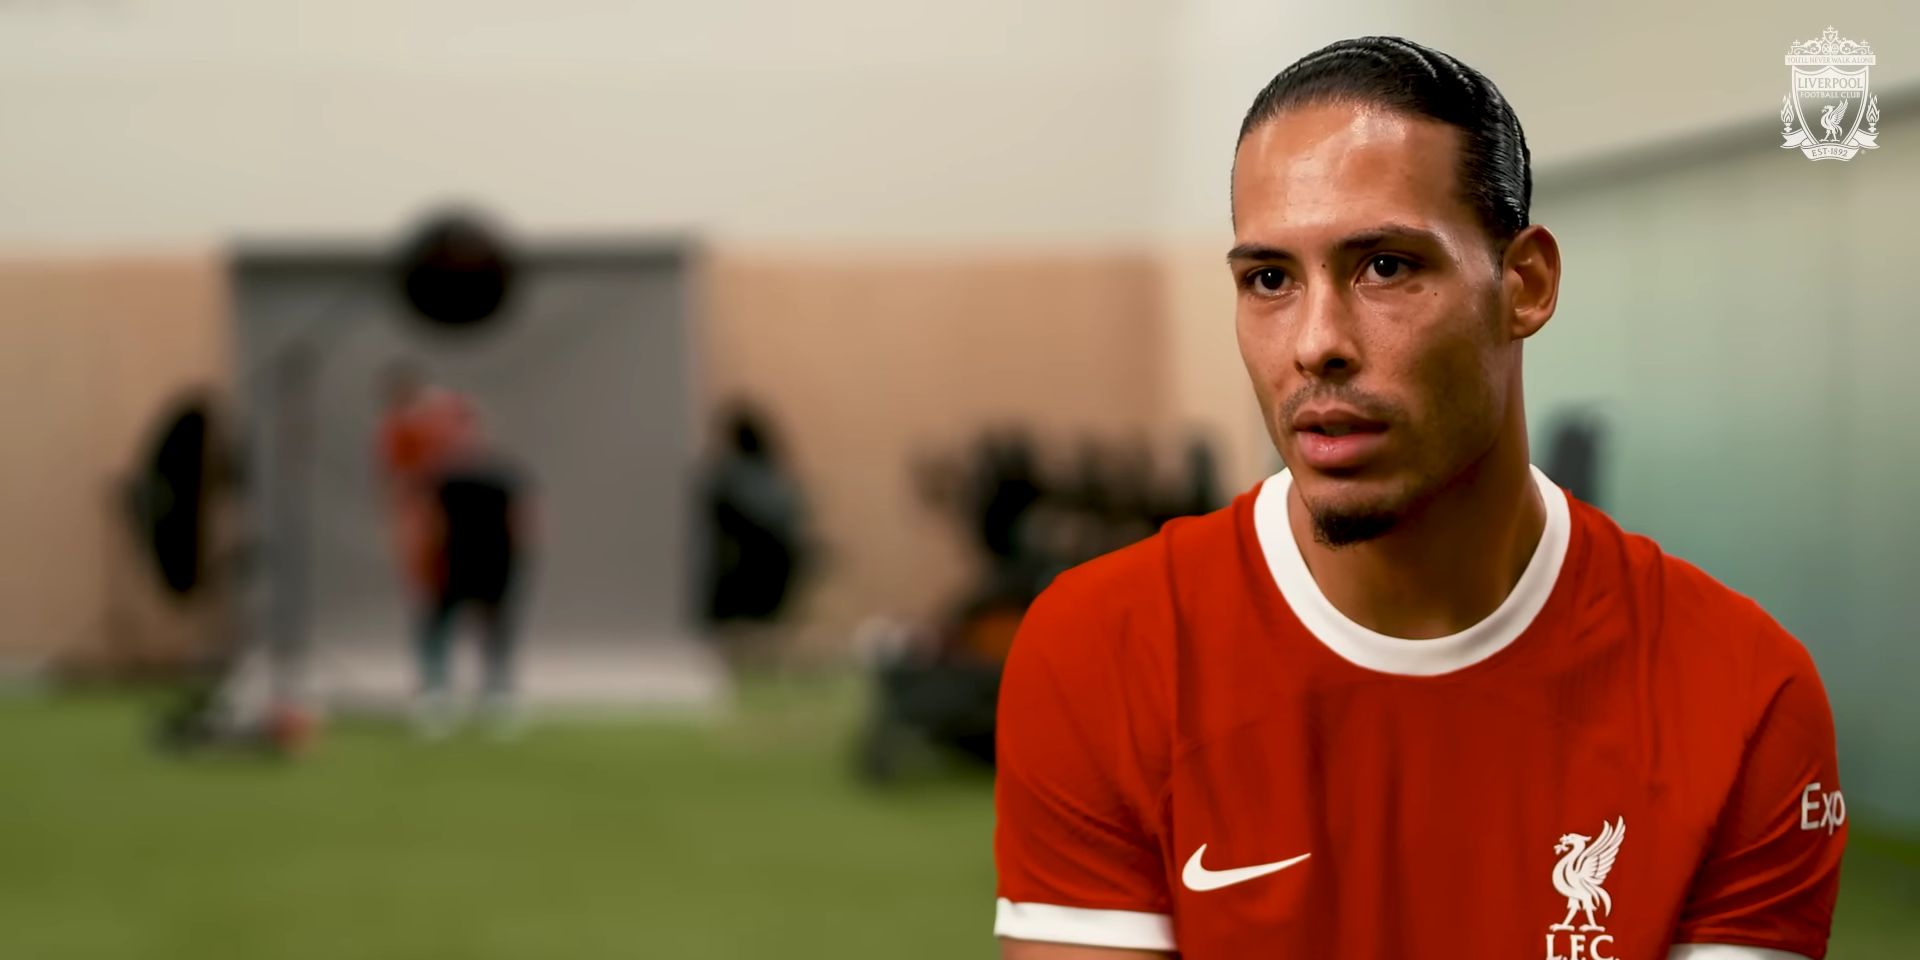 (Video) Van Dijk on the impact Klopp’s departure will have on squad wanting to win Carabao Cup